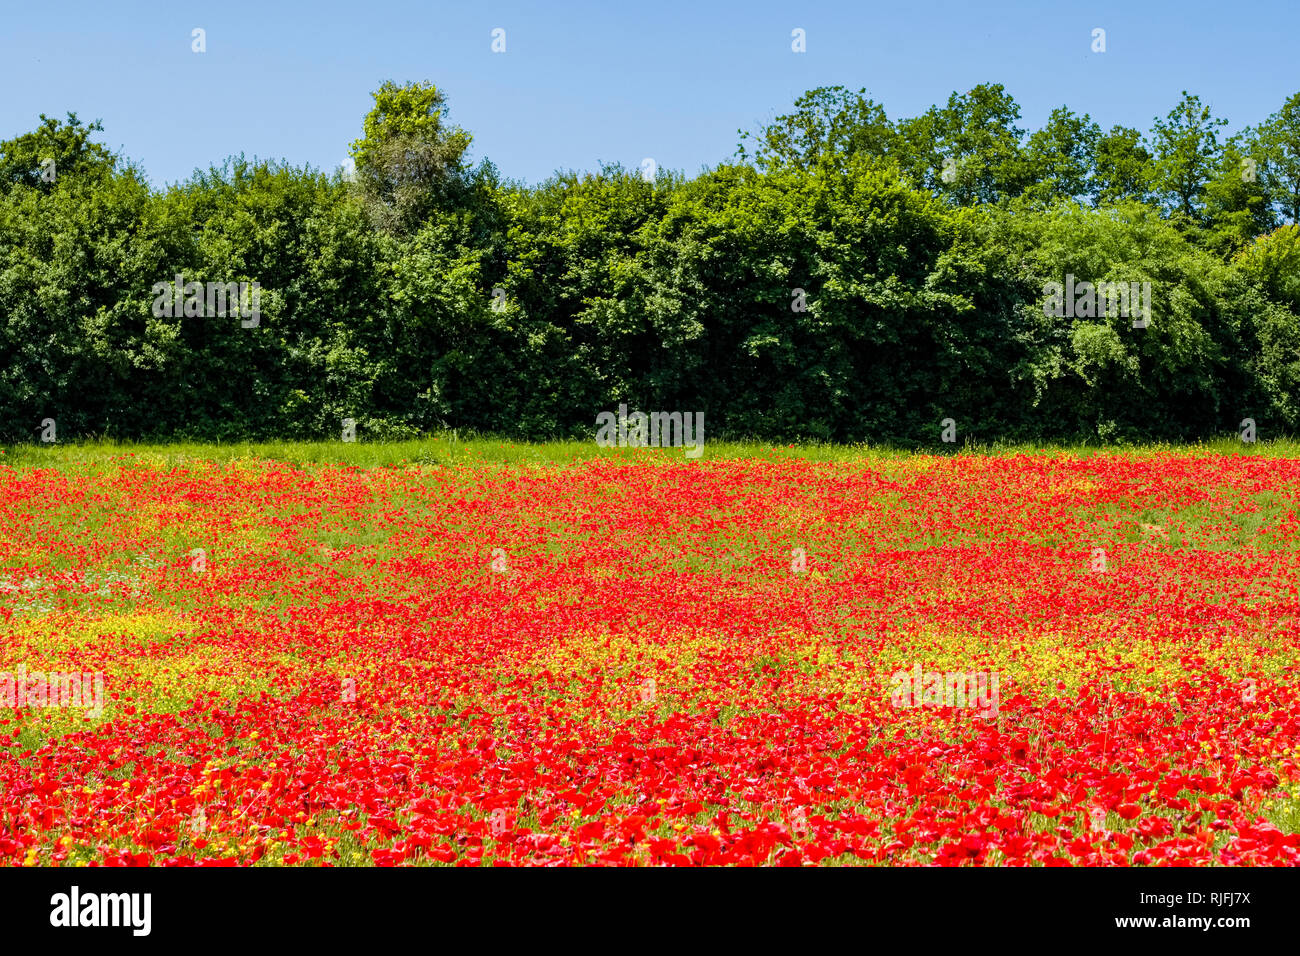 Big field of red blooming poppies (Papaveraceae), trees in the distance Stock Photo